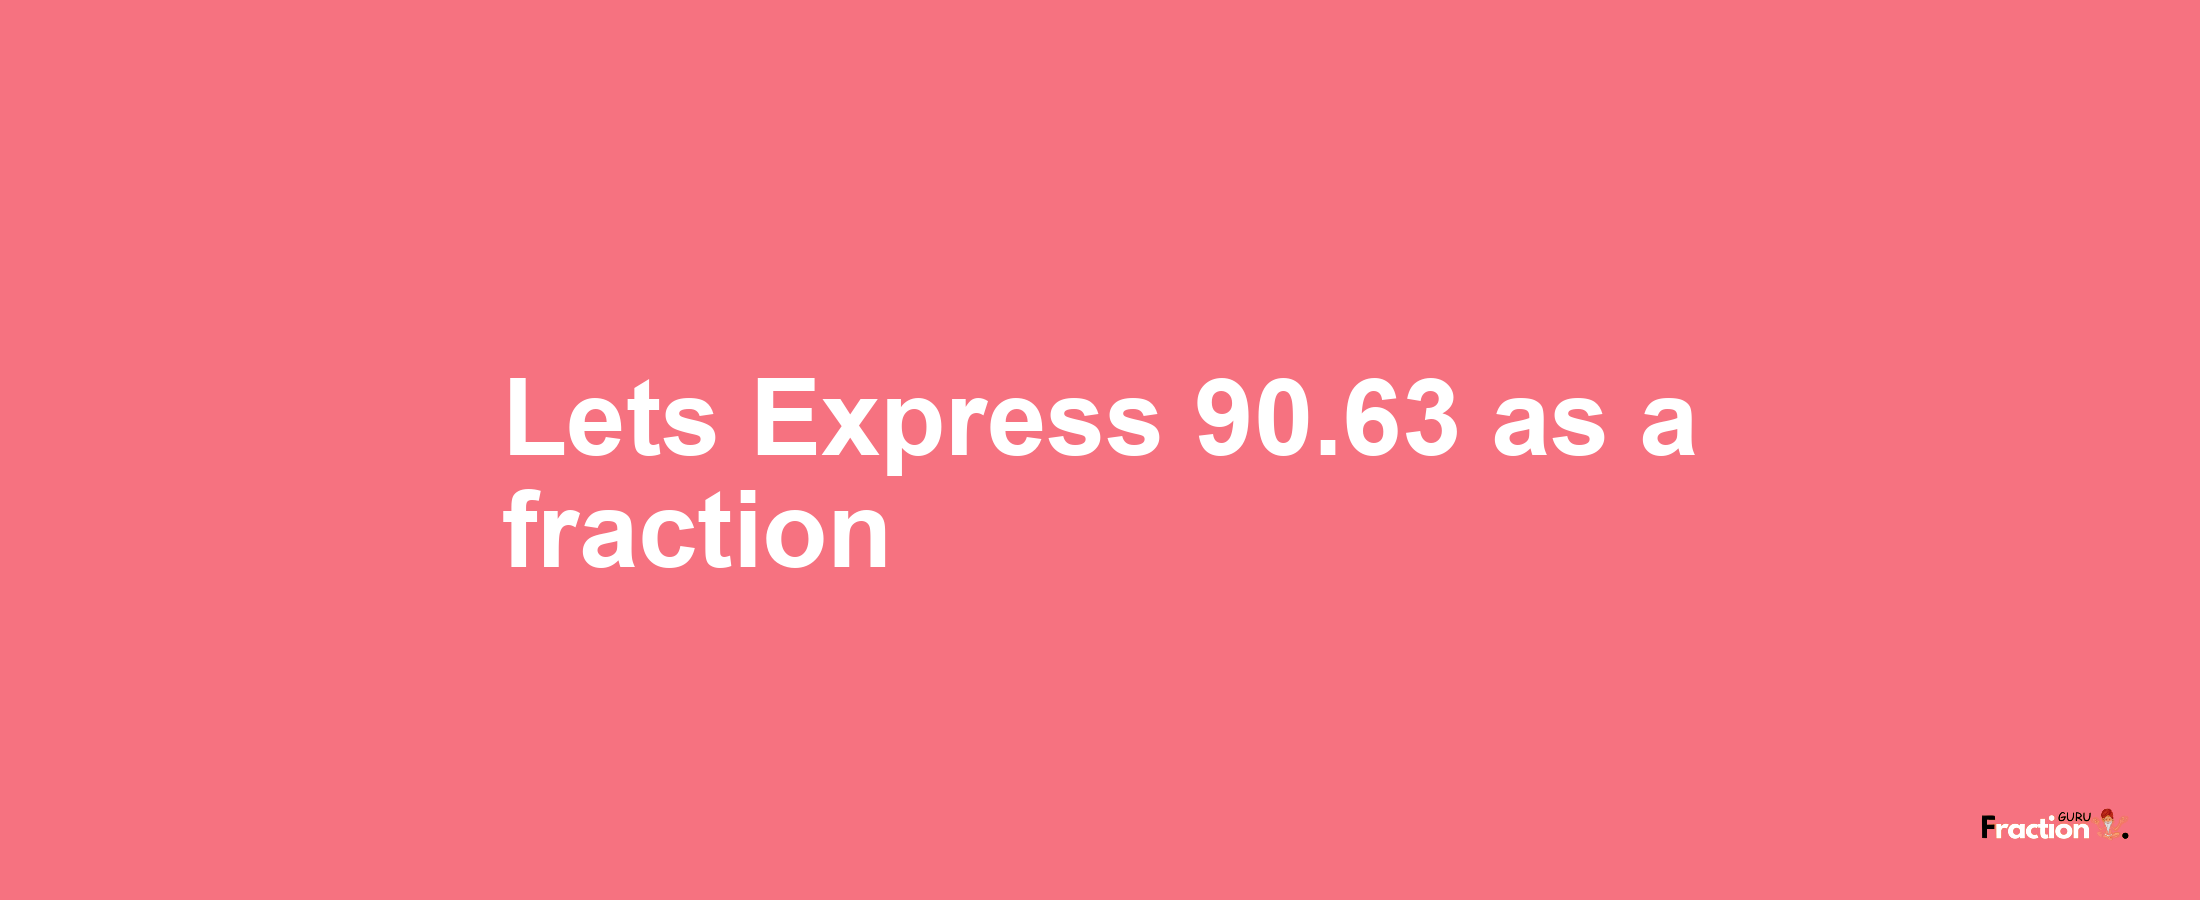 Lets Express 90.63 as afraction